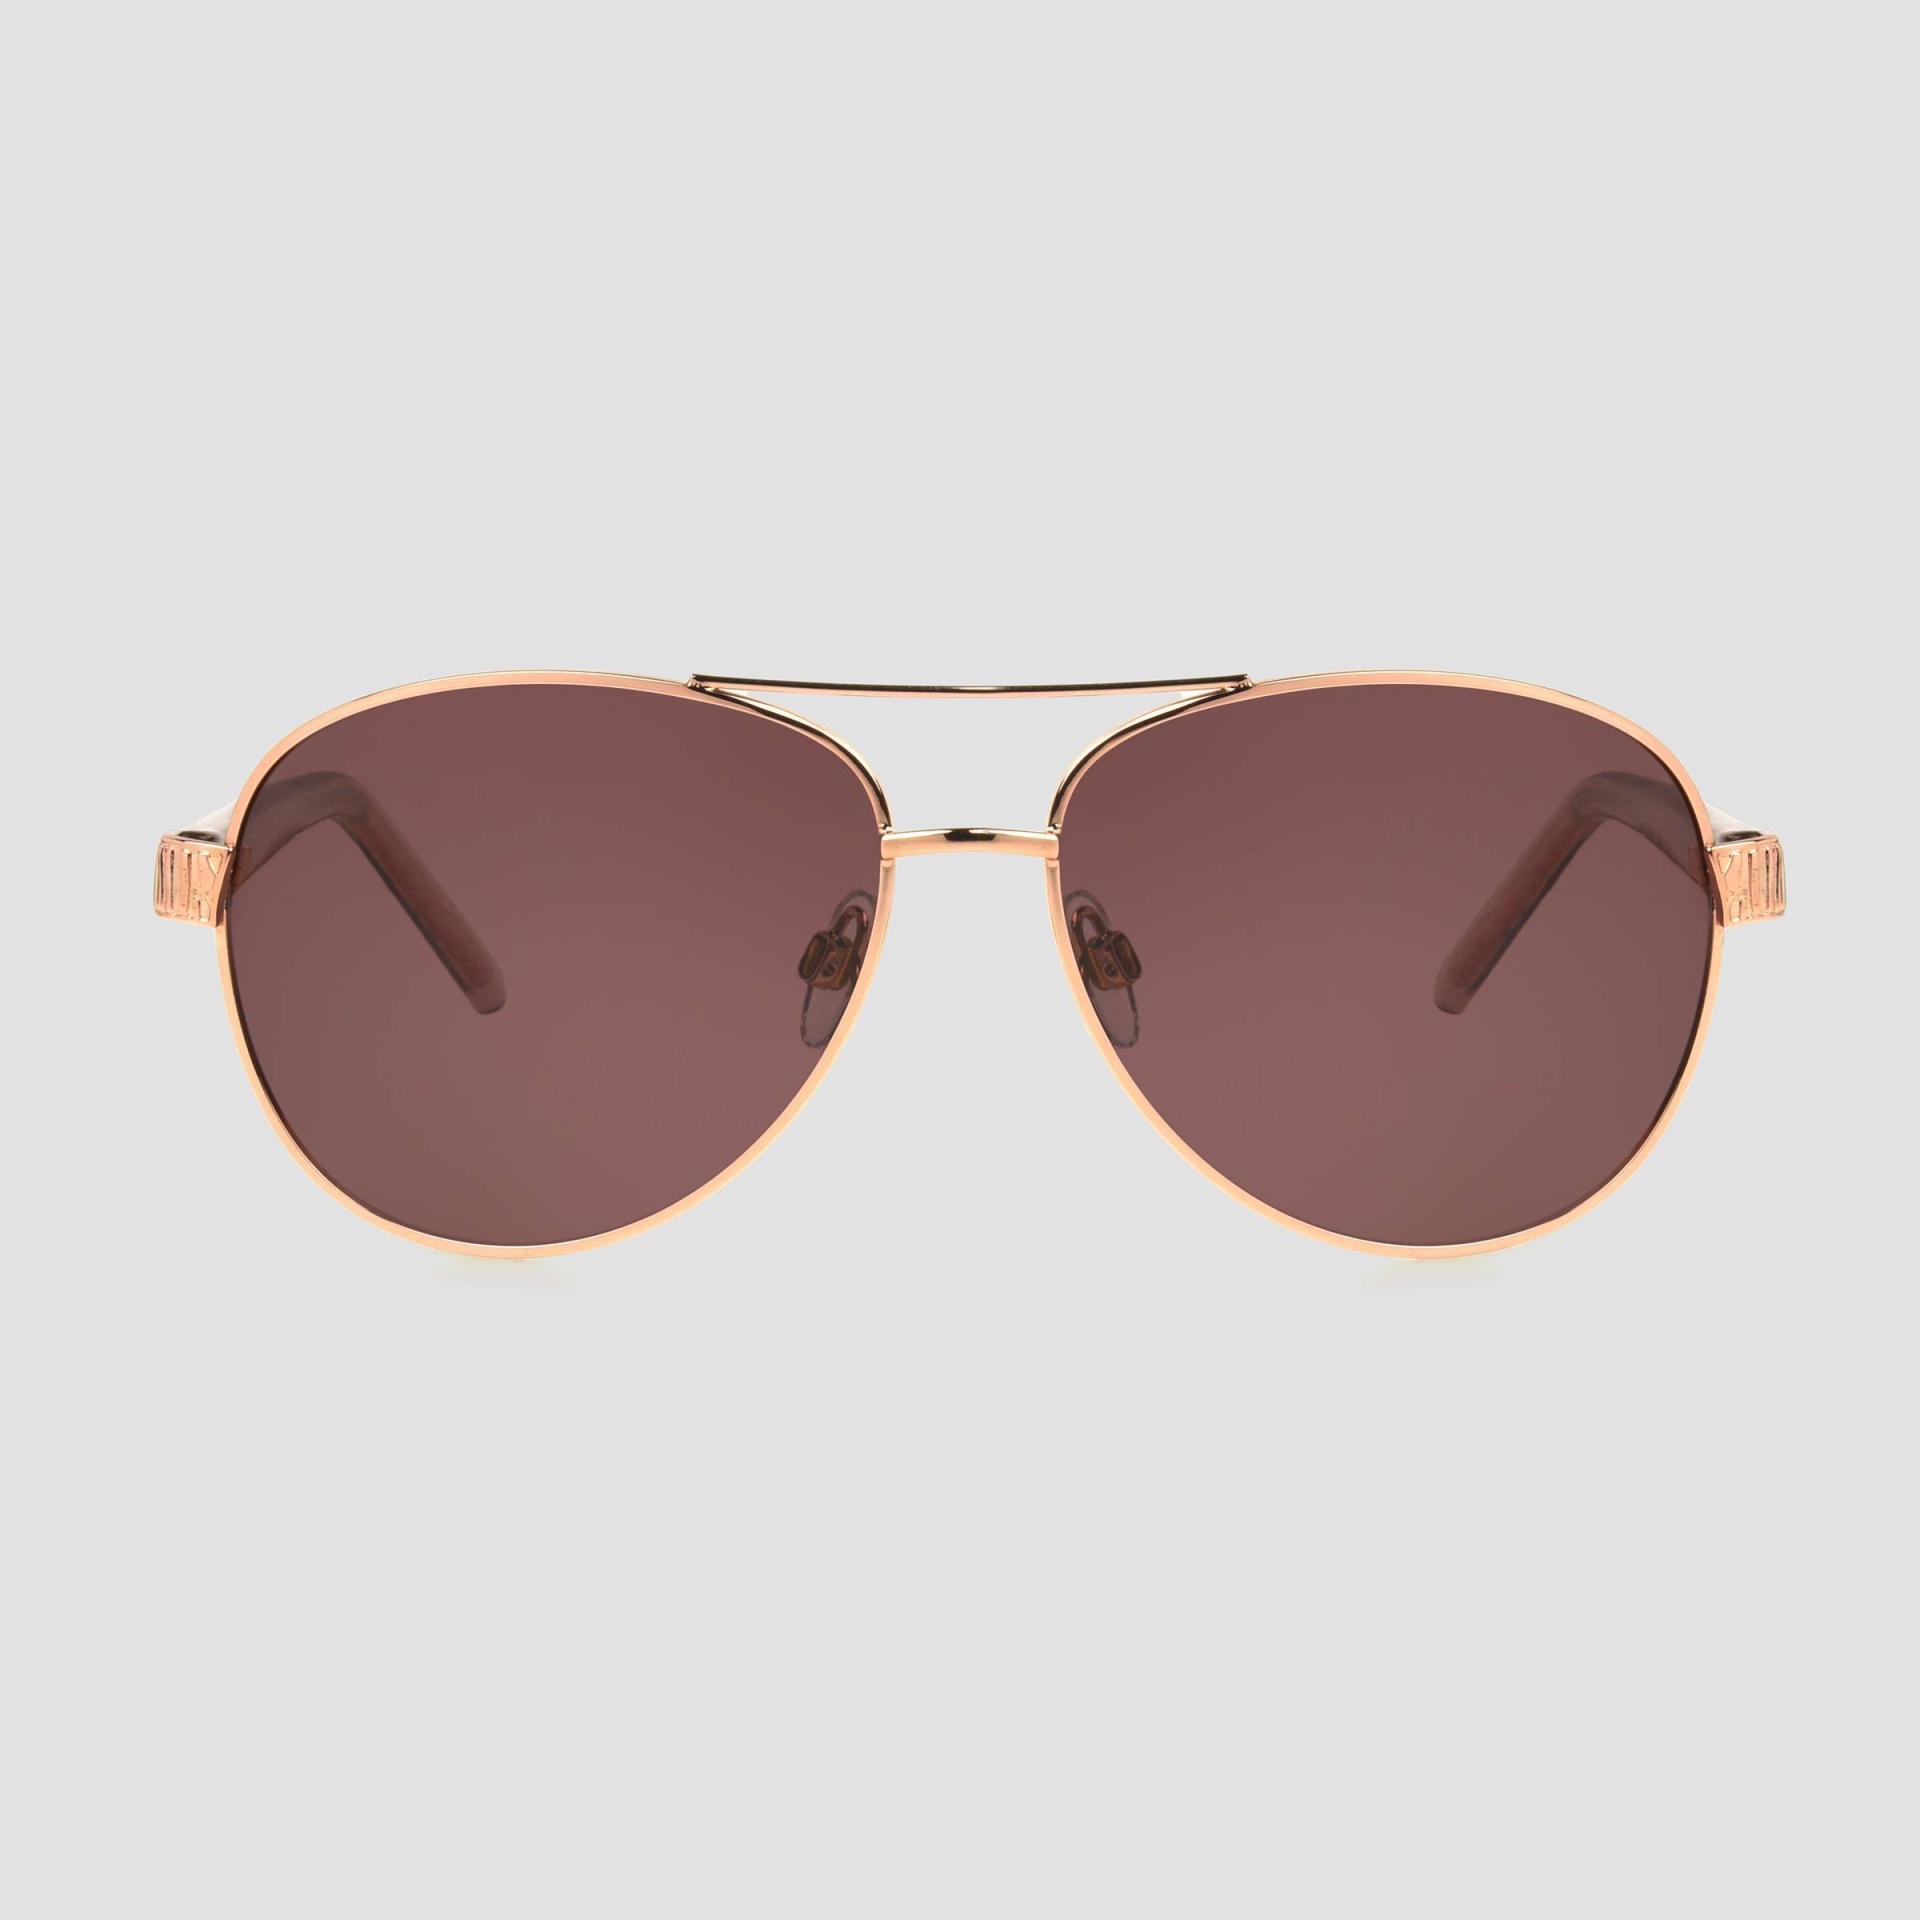 slide 1 of 2, Women's Aviator Sunglasses with Polarized Lenses - A New Day Rose Gold, 1 ct